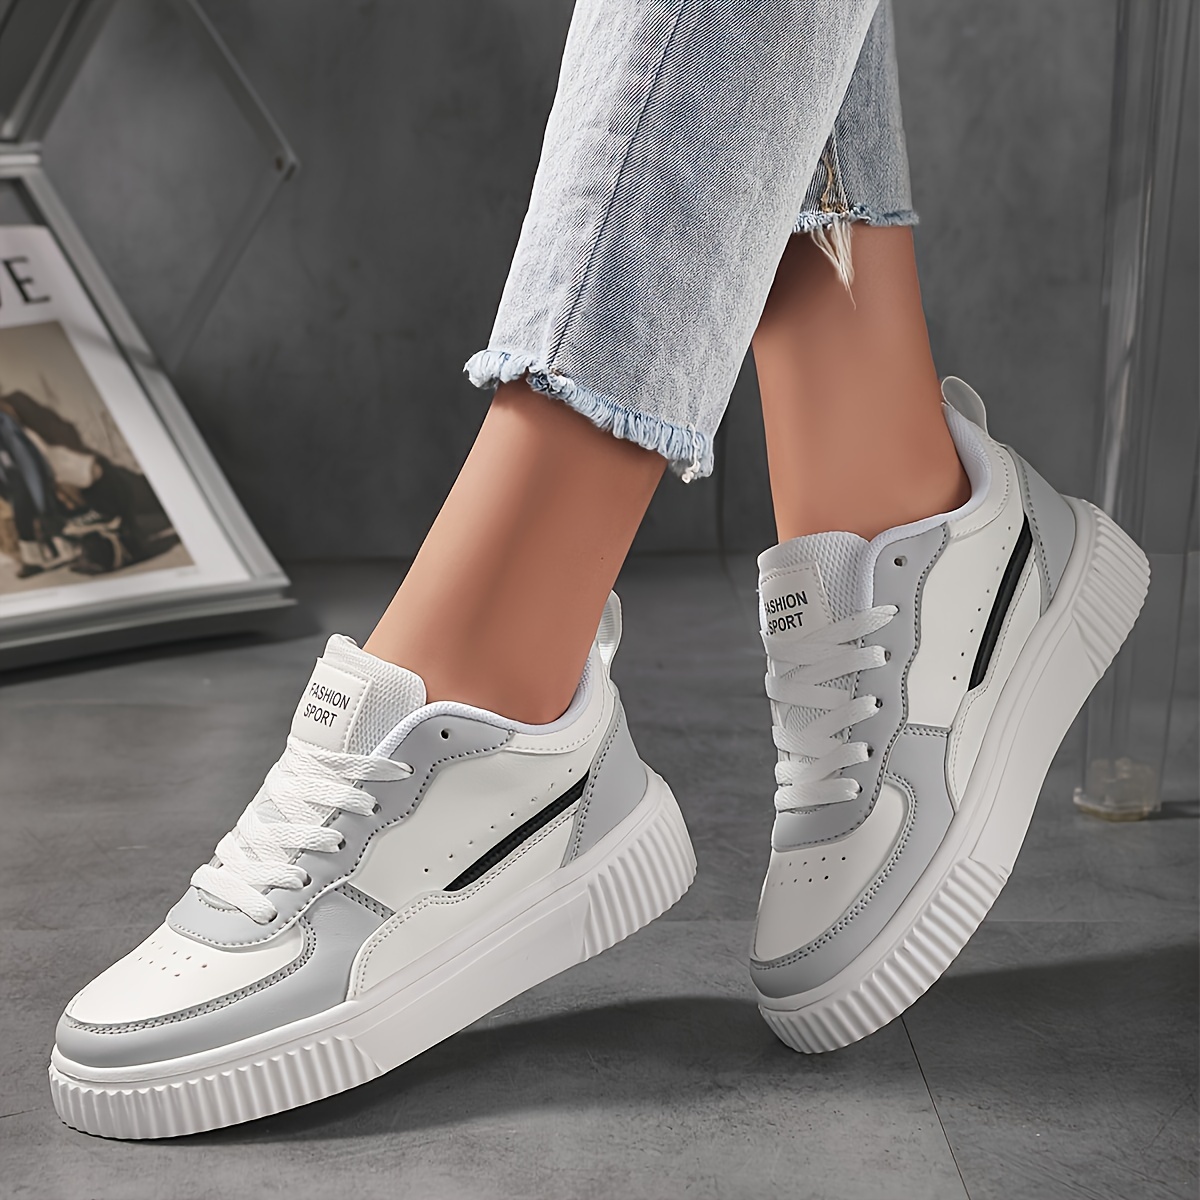 

Women's Colorblock Casual Sneakers, Lace Up Platform Soft Sole Walking Skate Shoes, Low-top Running Trainers